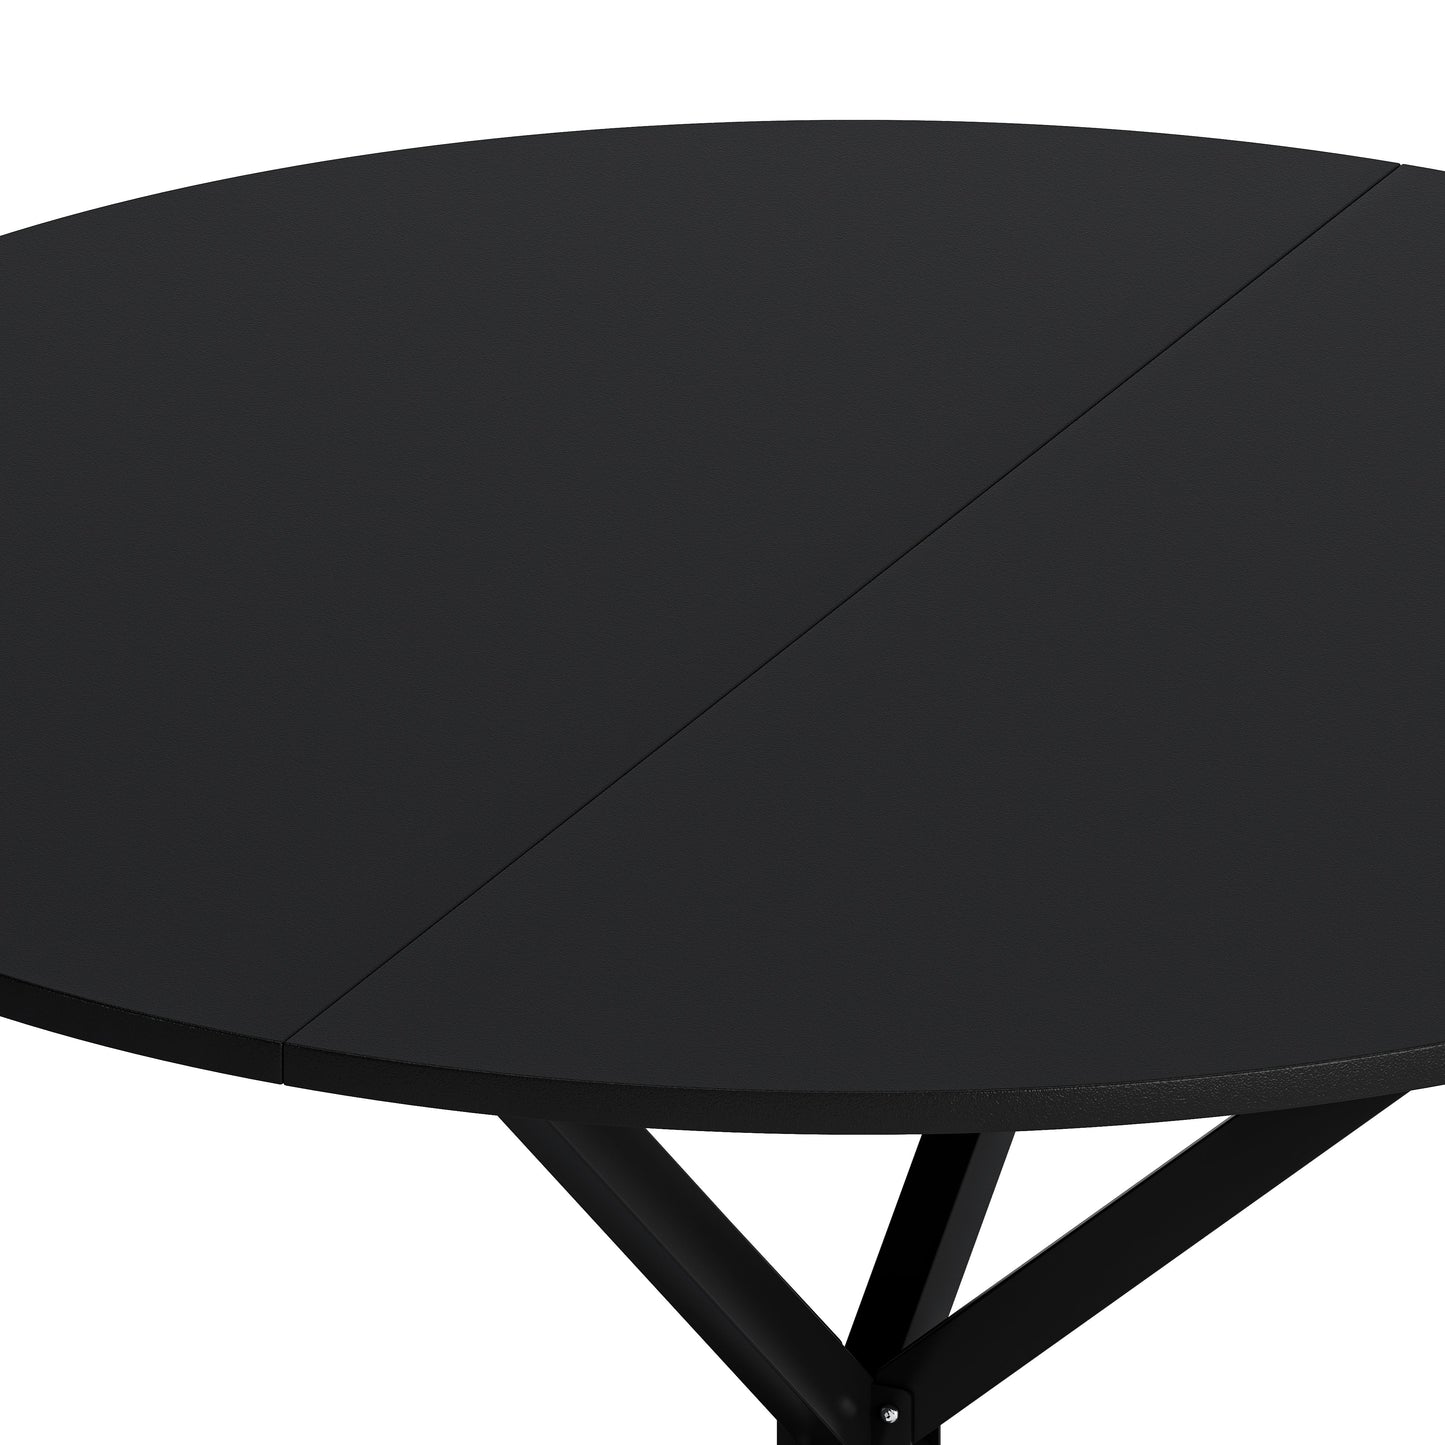 47.24 inch Modern Cross Leg Round Dining Table, Black Top Occasional Table, Two Piece Removable Top, Matte Finish Iron Legs